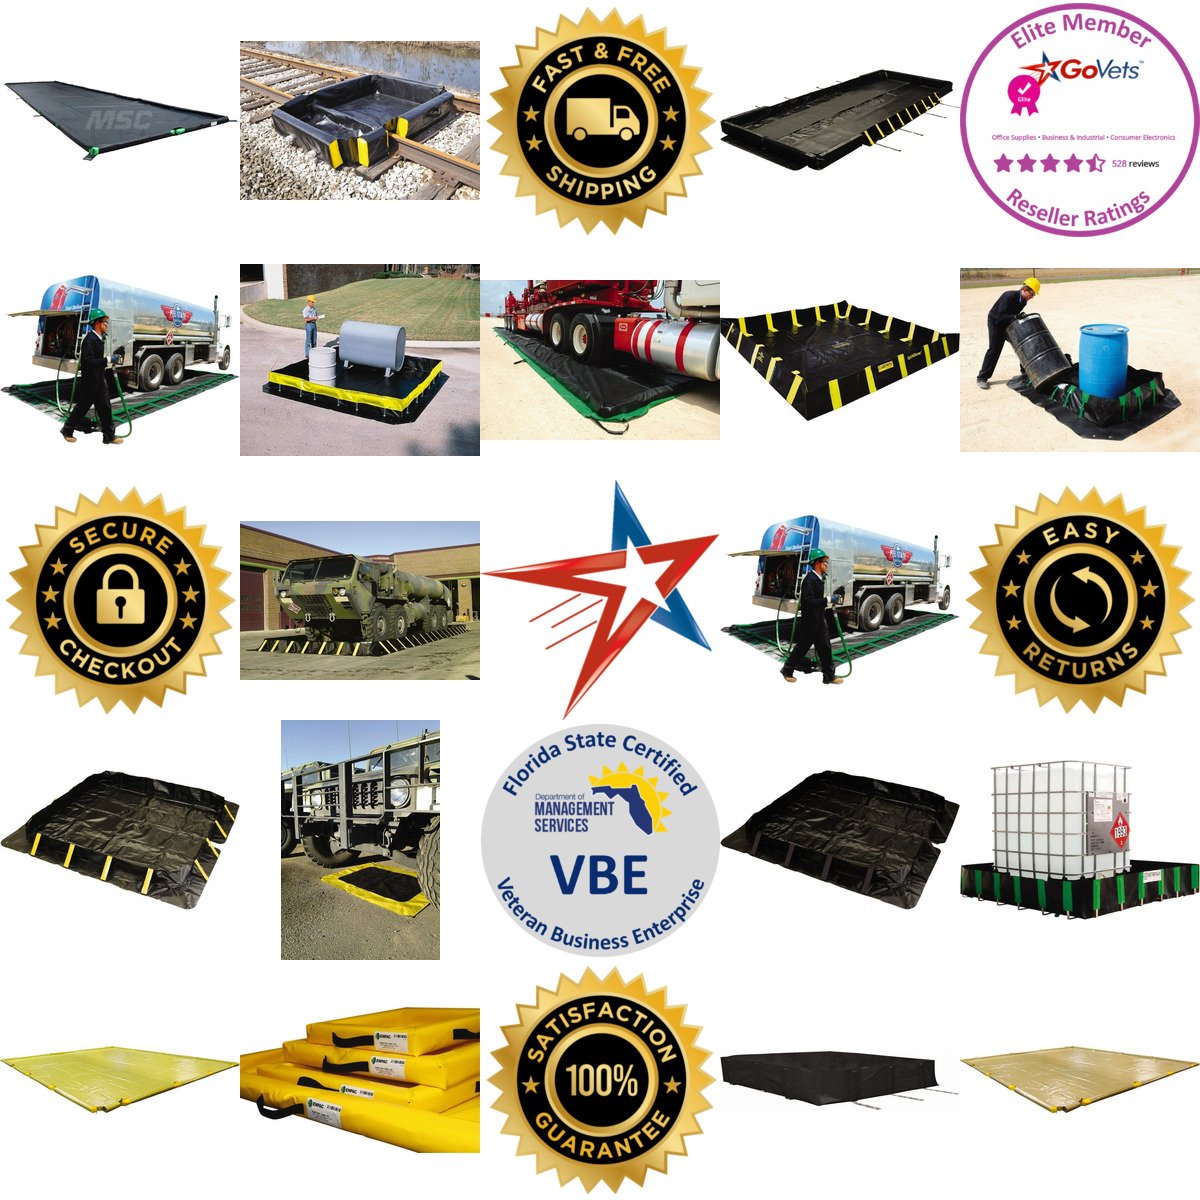 A selection of Collapsible Berms and Pools products on GoVets